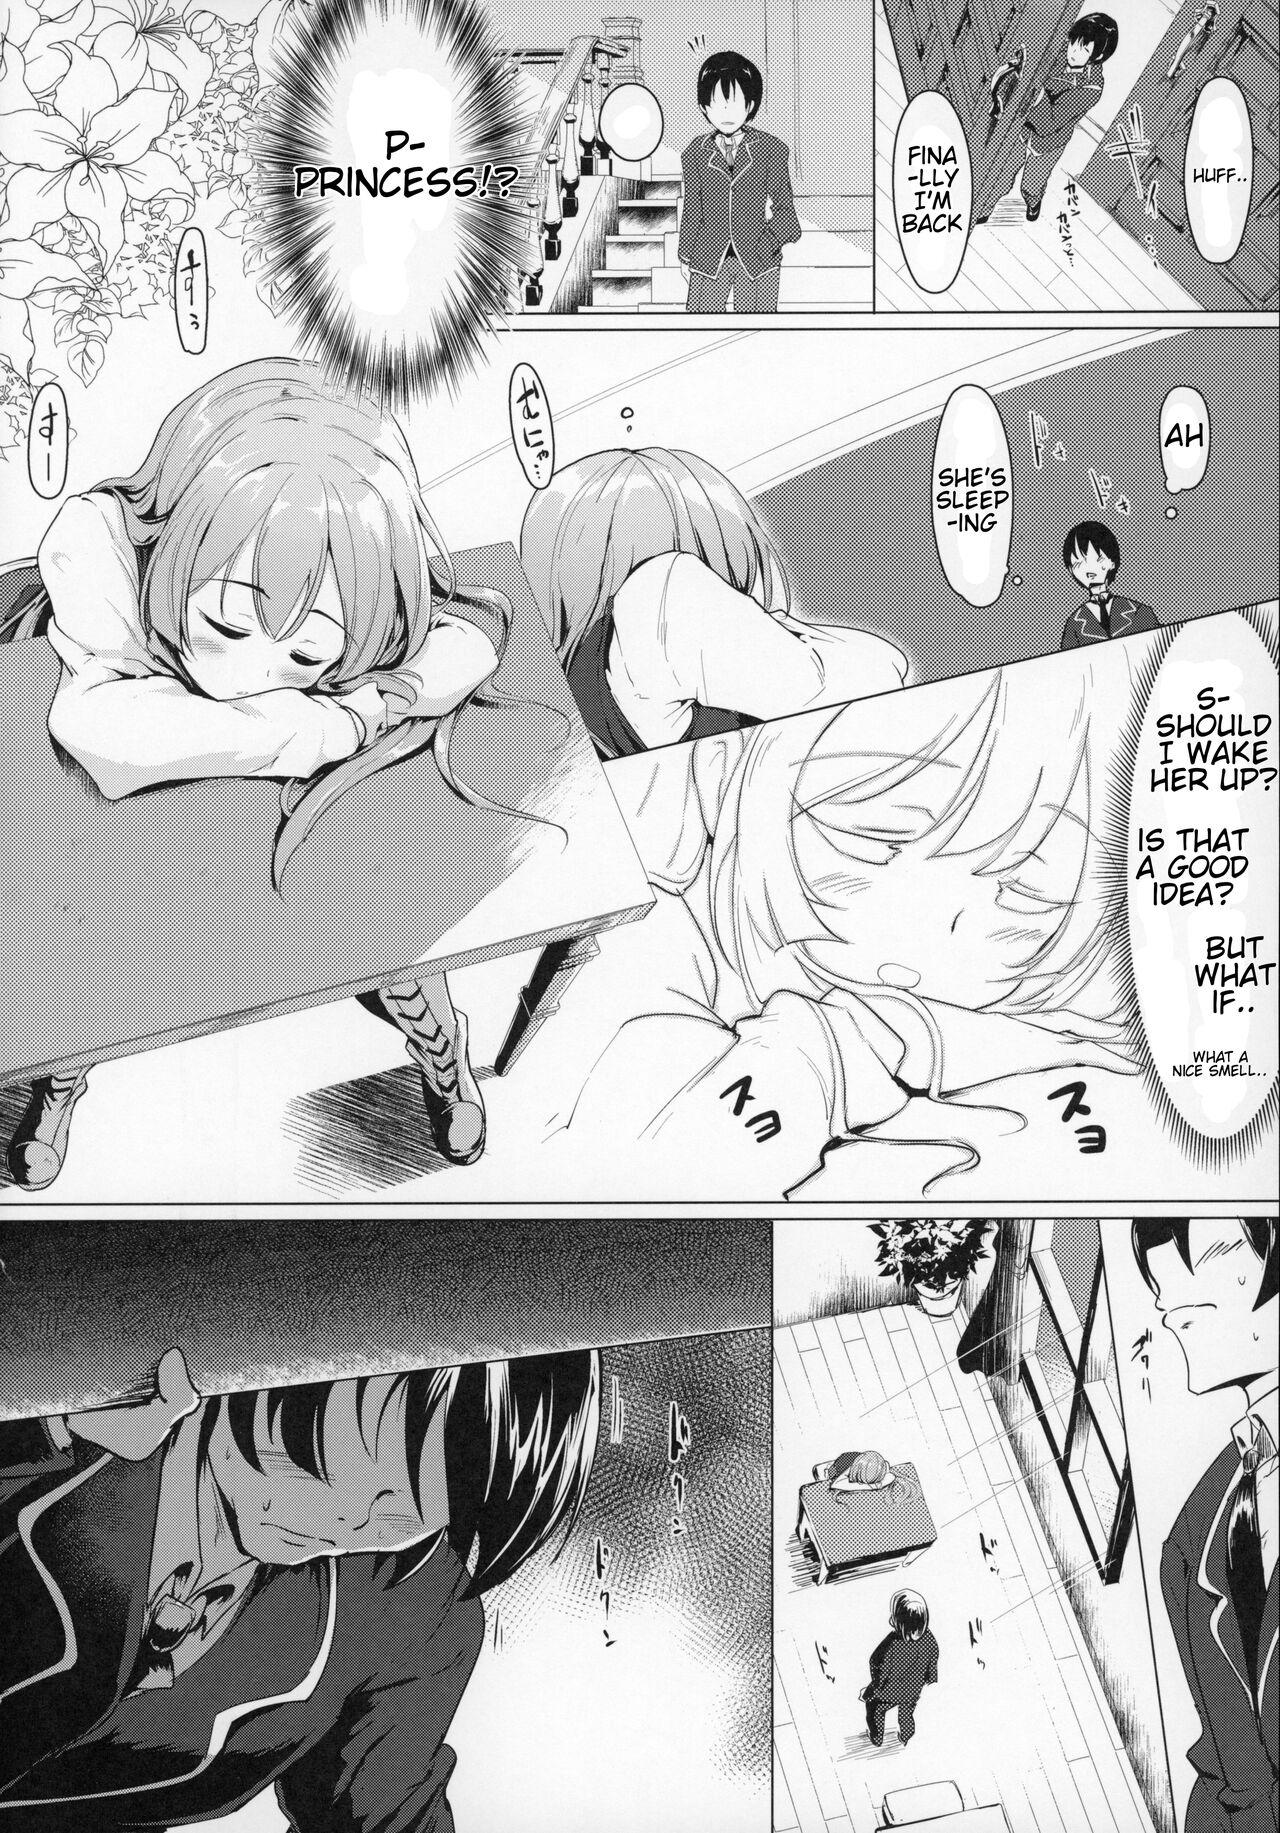 Youporn There's No Way An Ecchi Event Will Happen Between Me and the Princess of Manaria Kingdom! - Manaria friends Cocksucker - Page 7